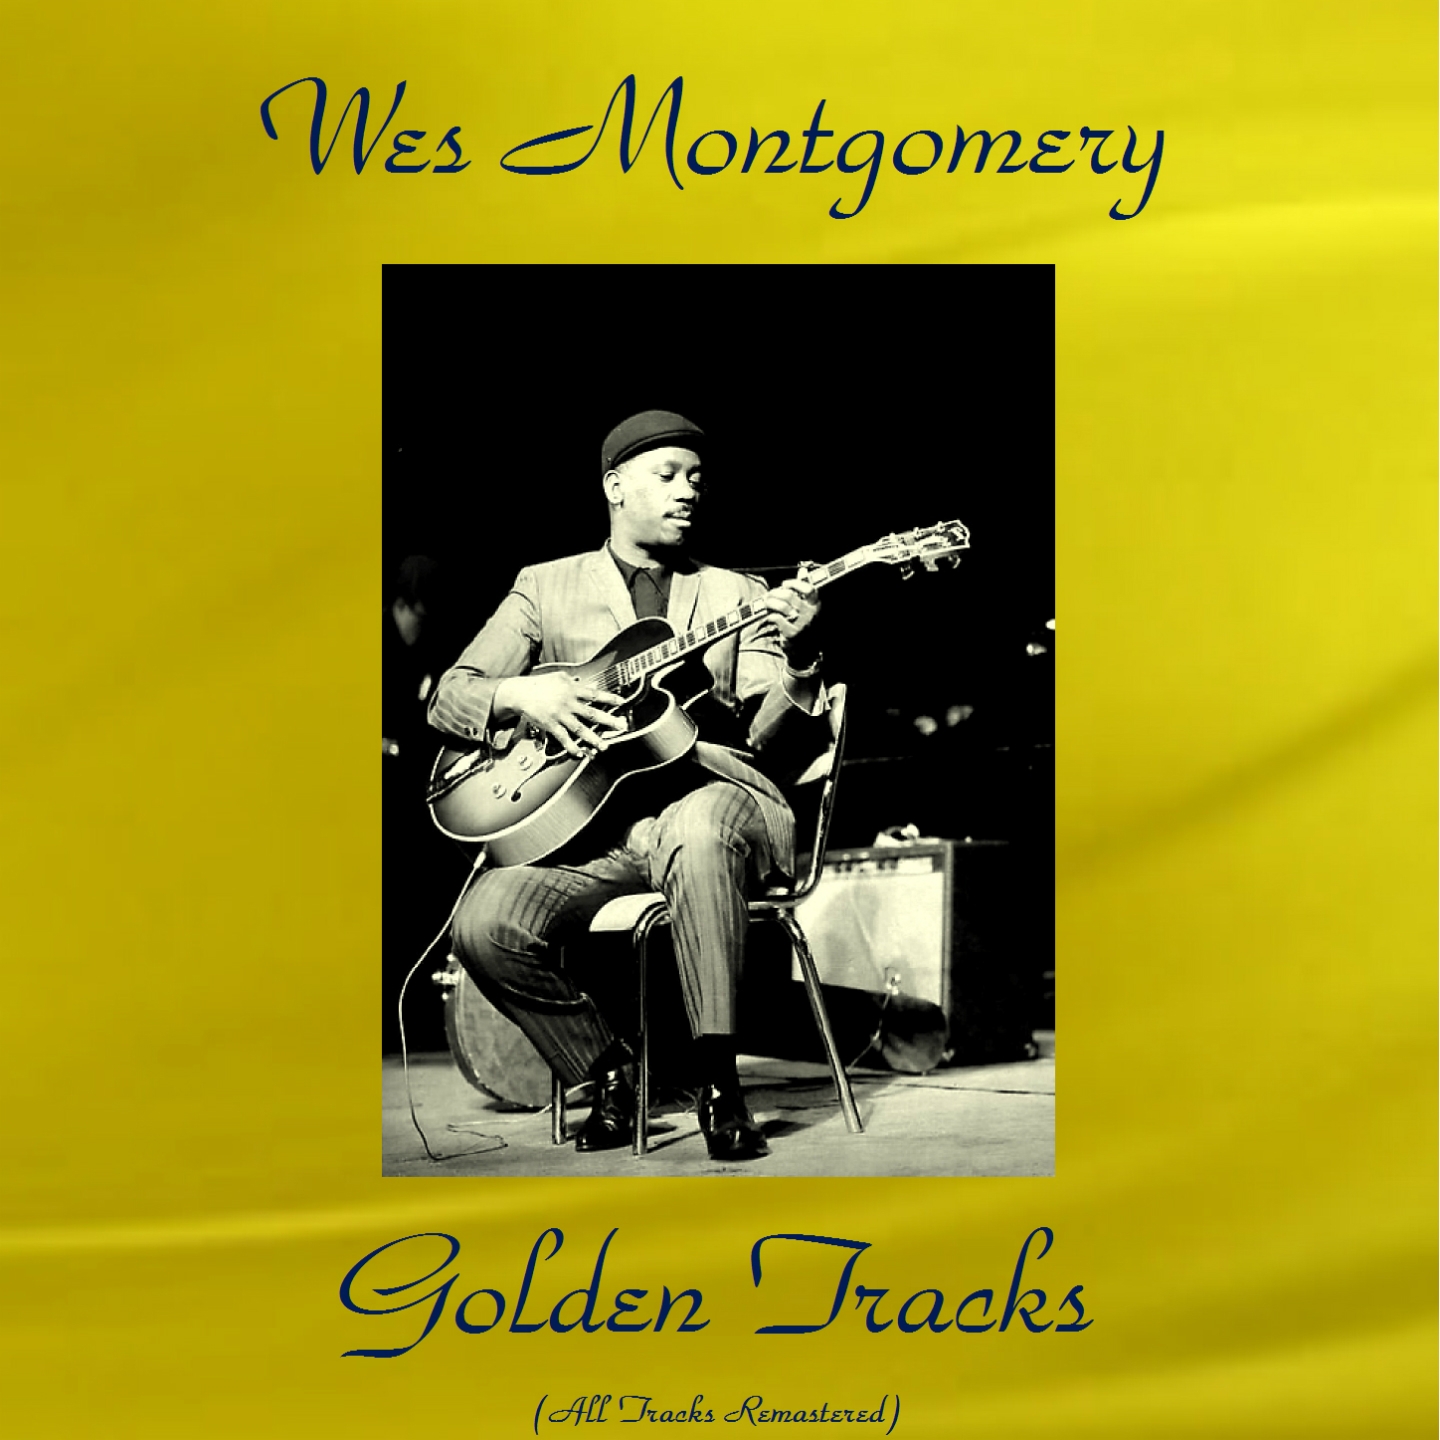 Wes Montgomery Golden Tracks (All Tracks Remastered)